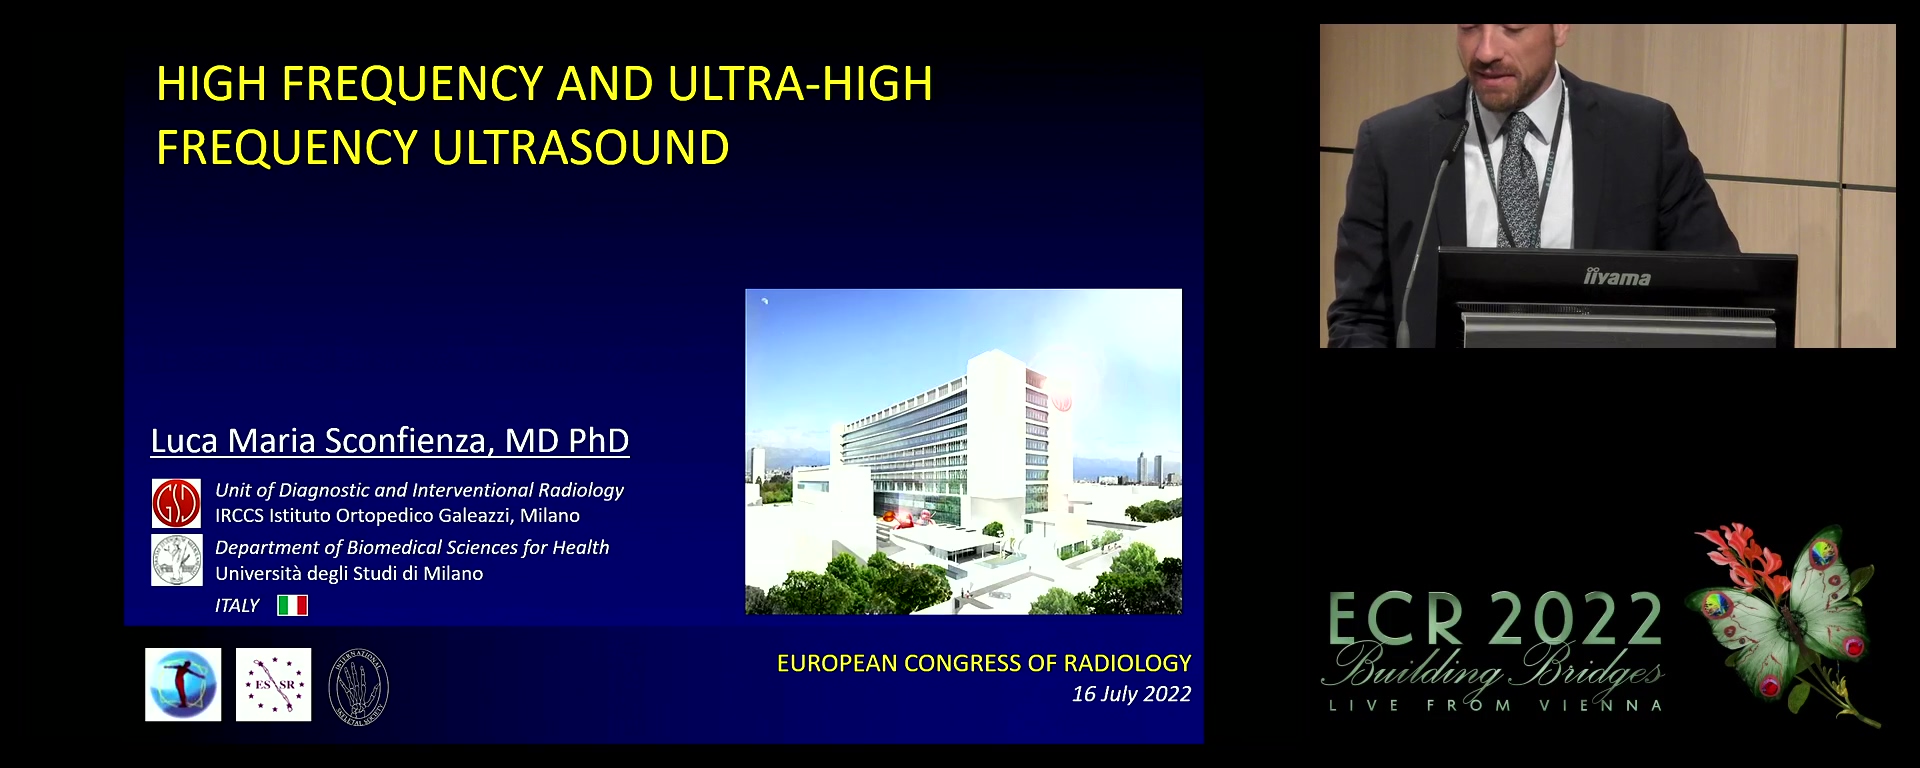 High-frequency and ultra-high frequency ultrasound